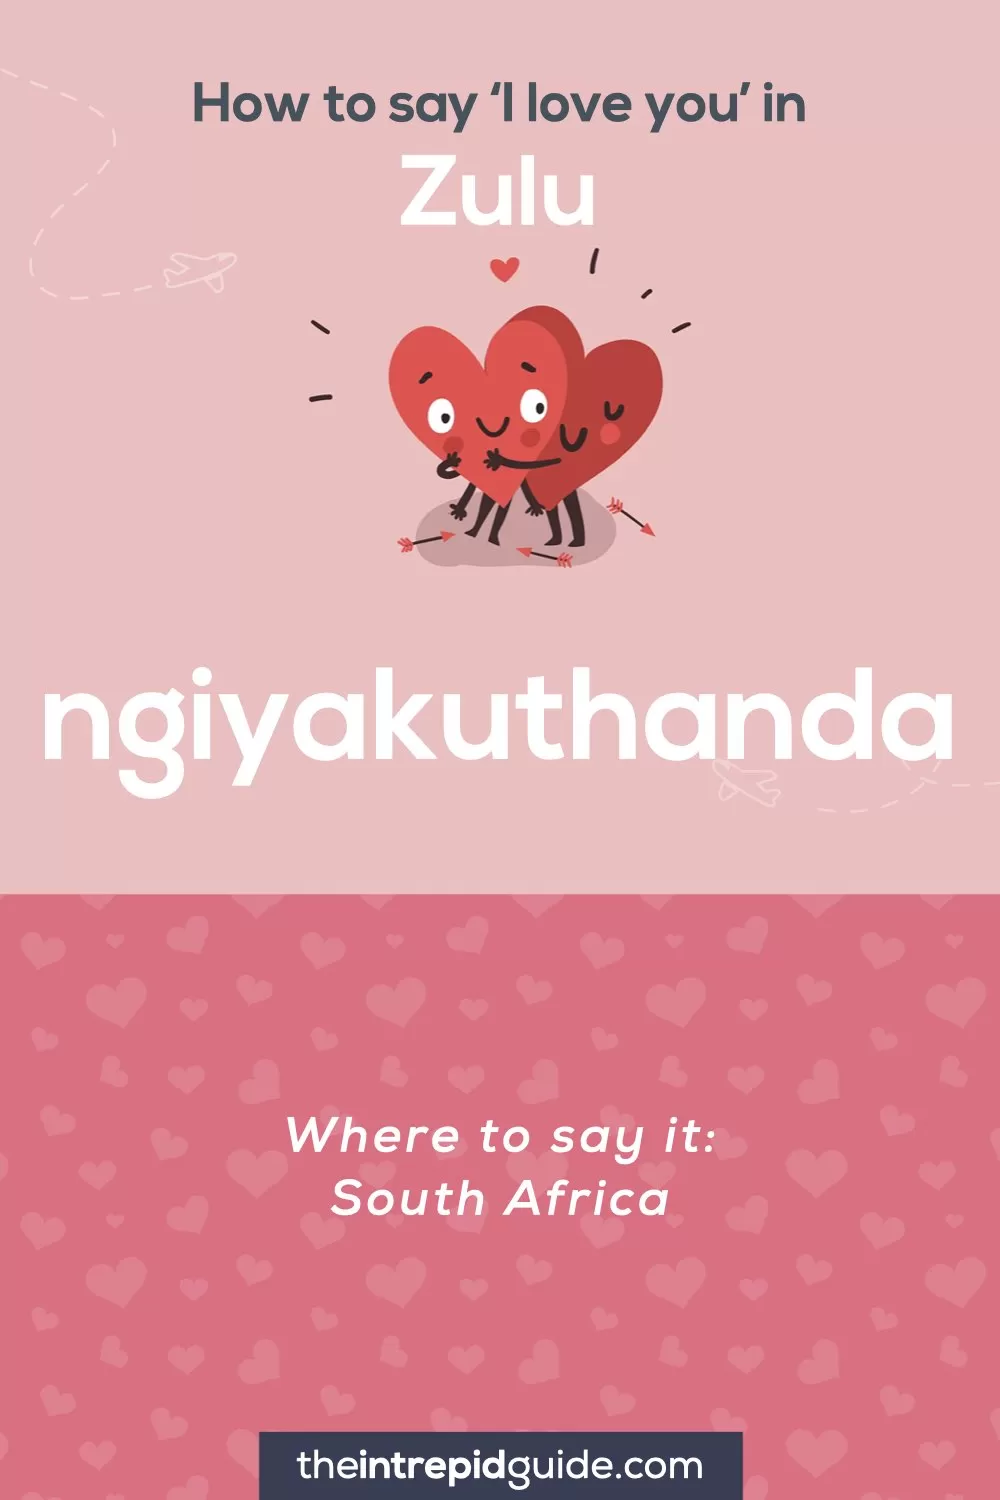 How to say I love you in different languages - Zulu - ngiyakuthanda